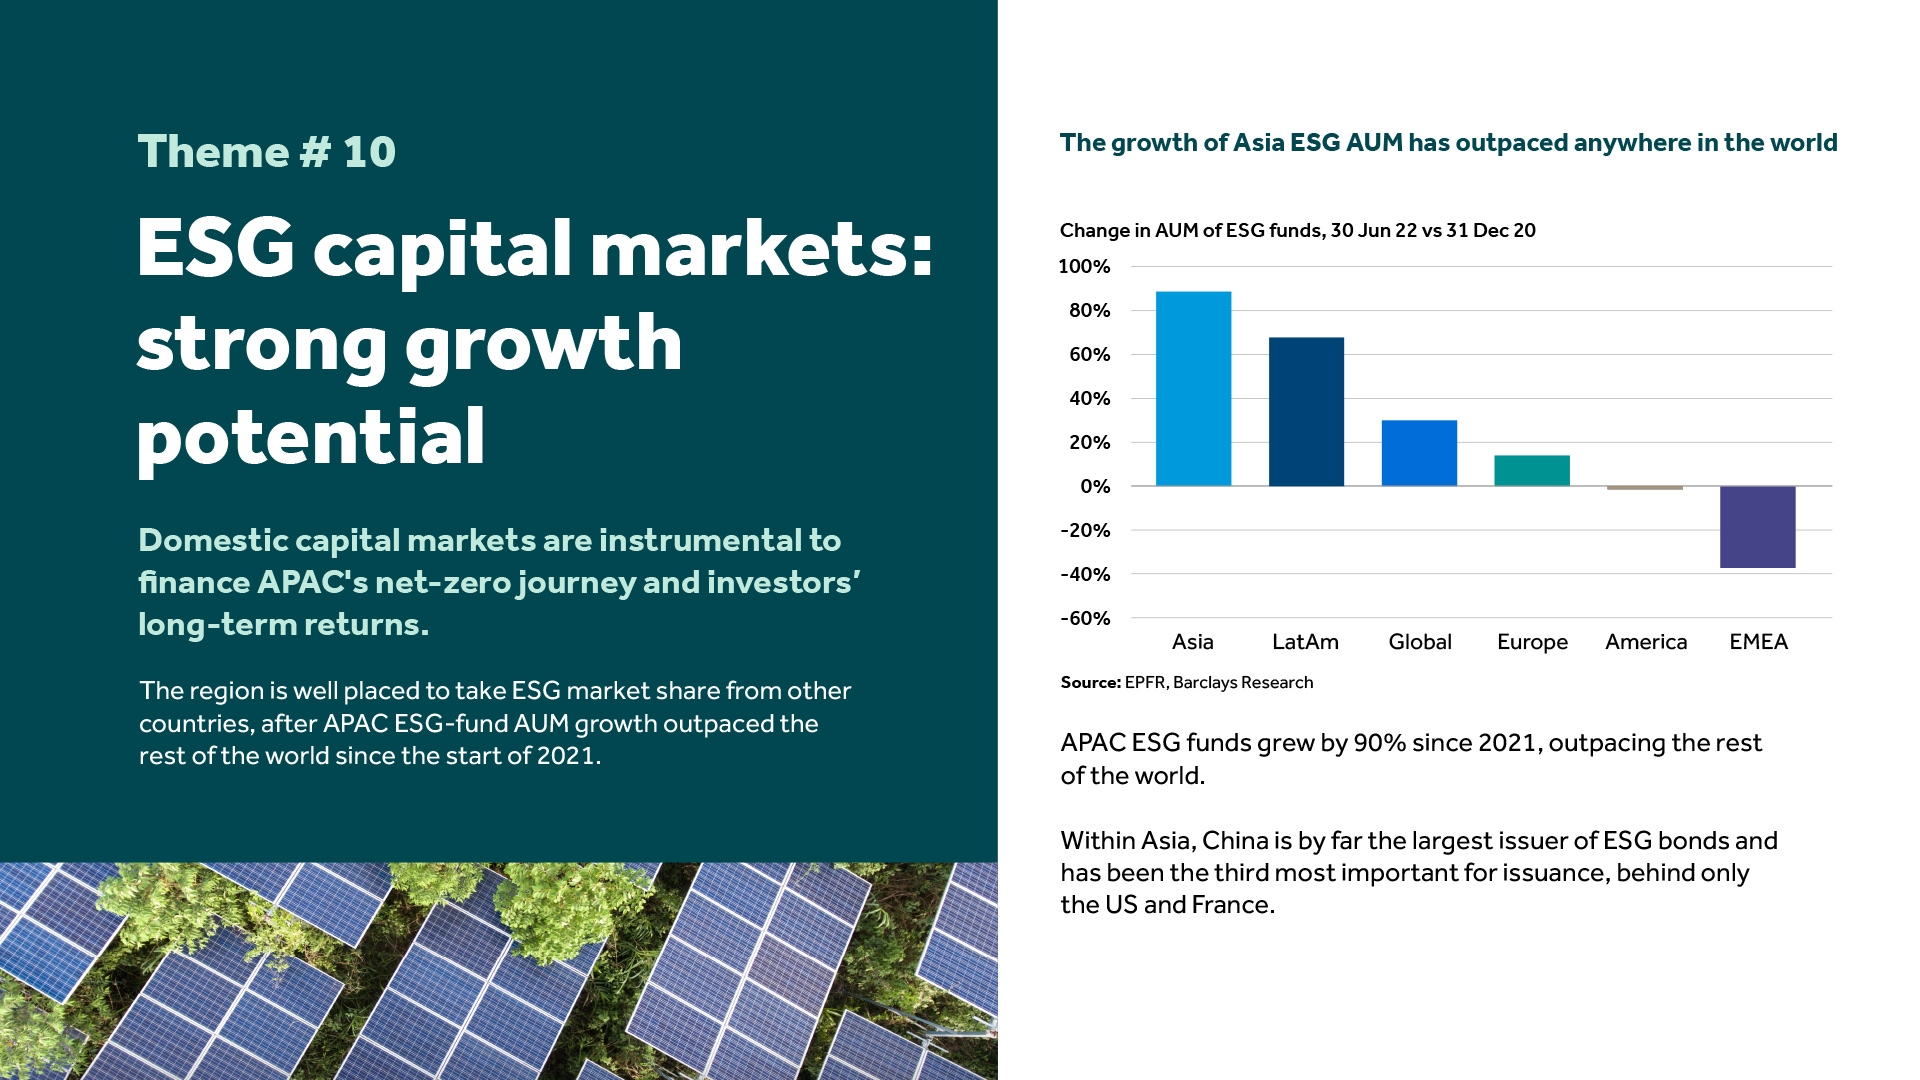 ESG capital markets: strong growth potential